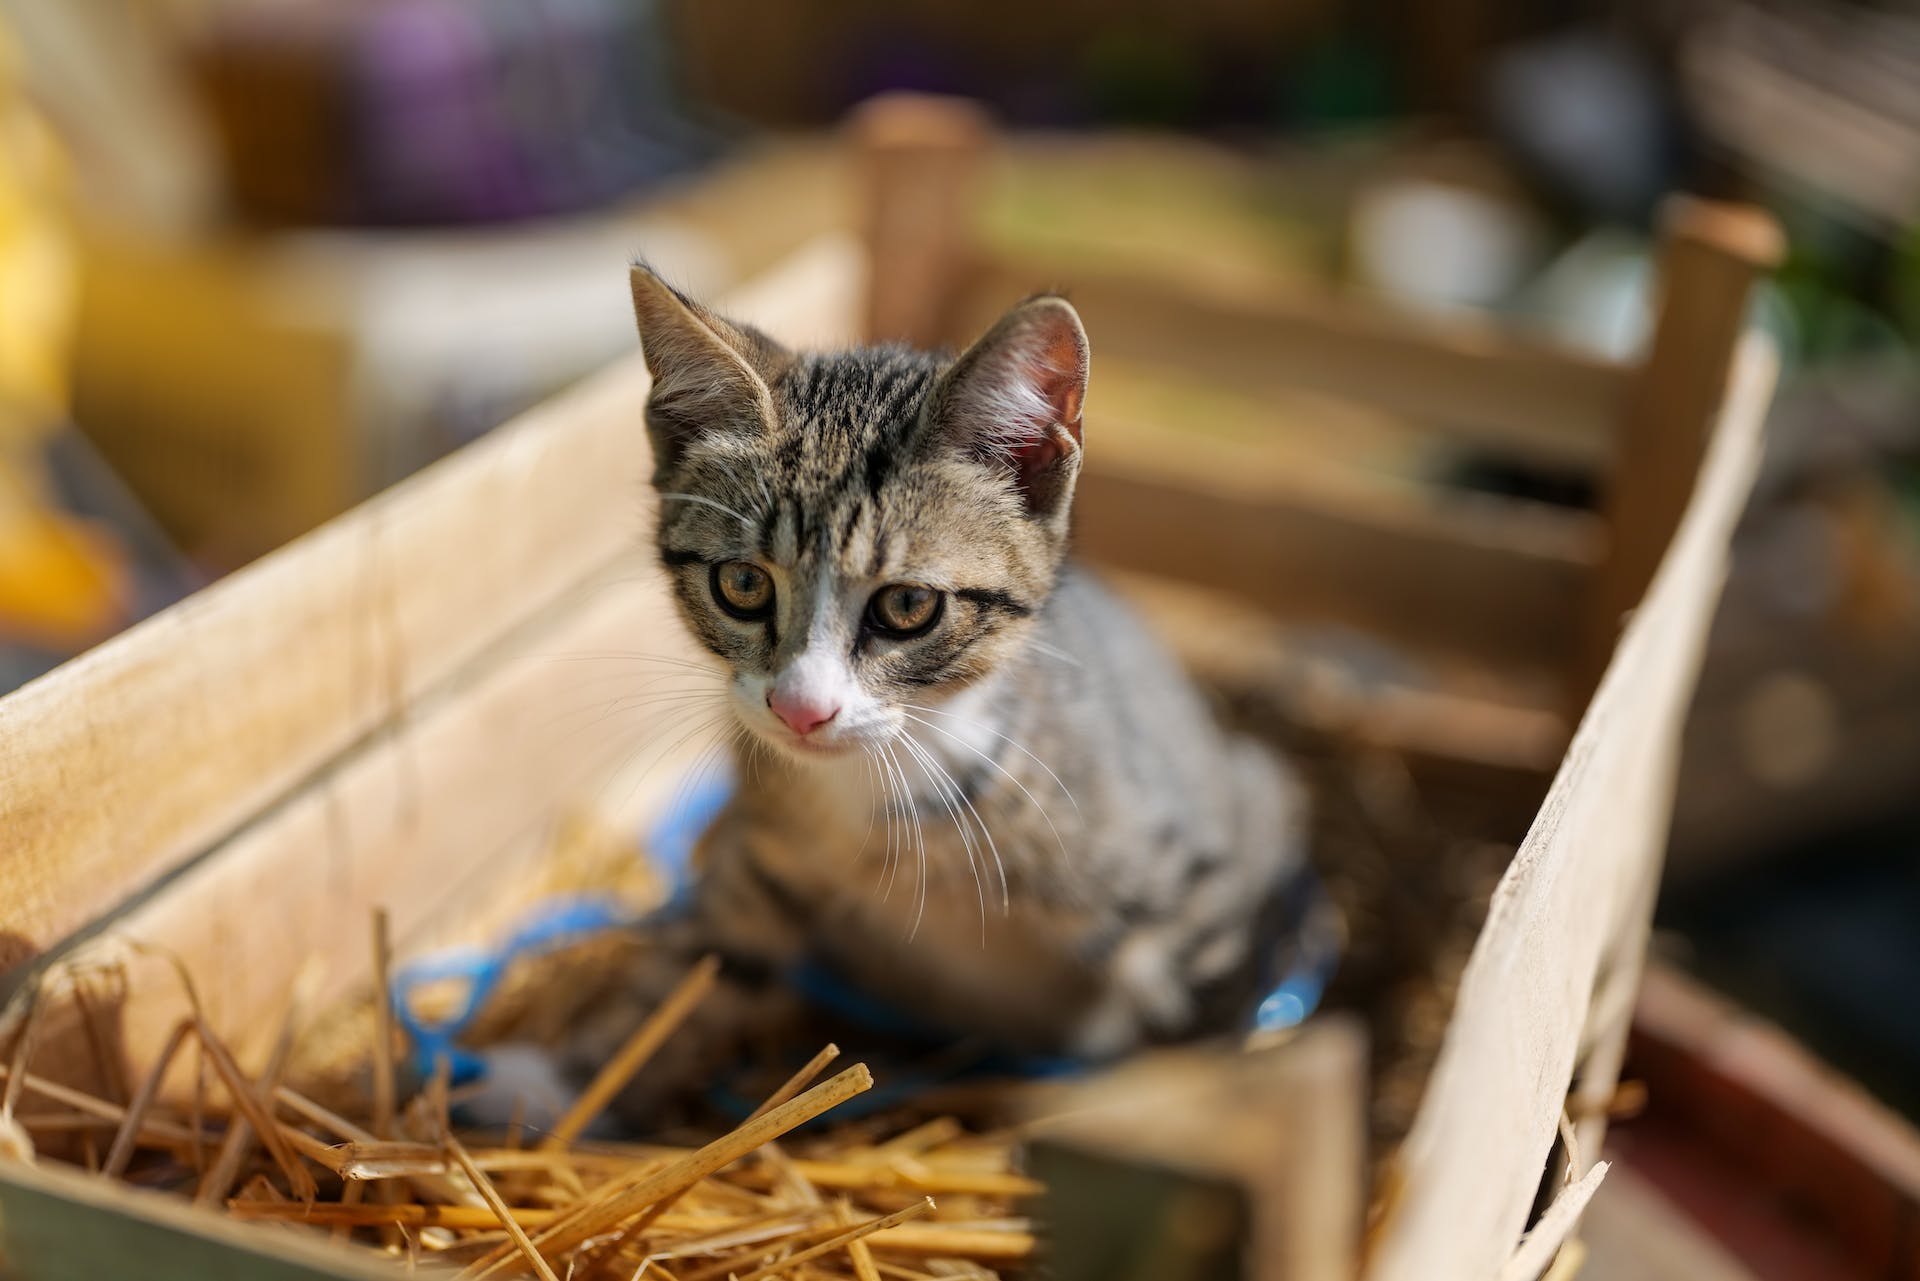 An outdoor cat settling into a crate full of straw